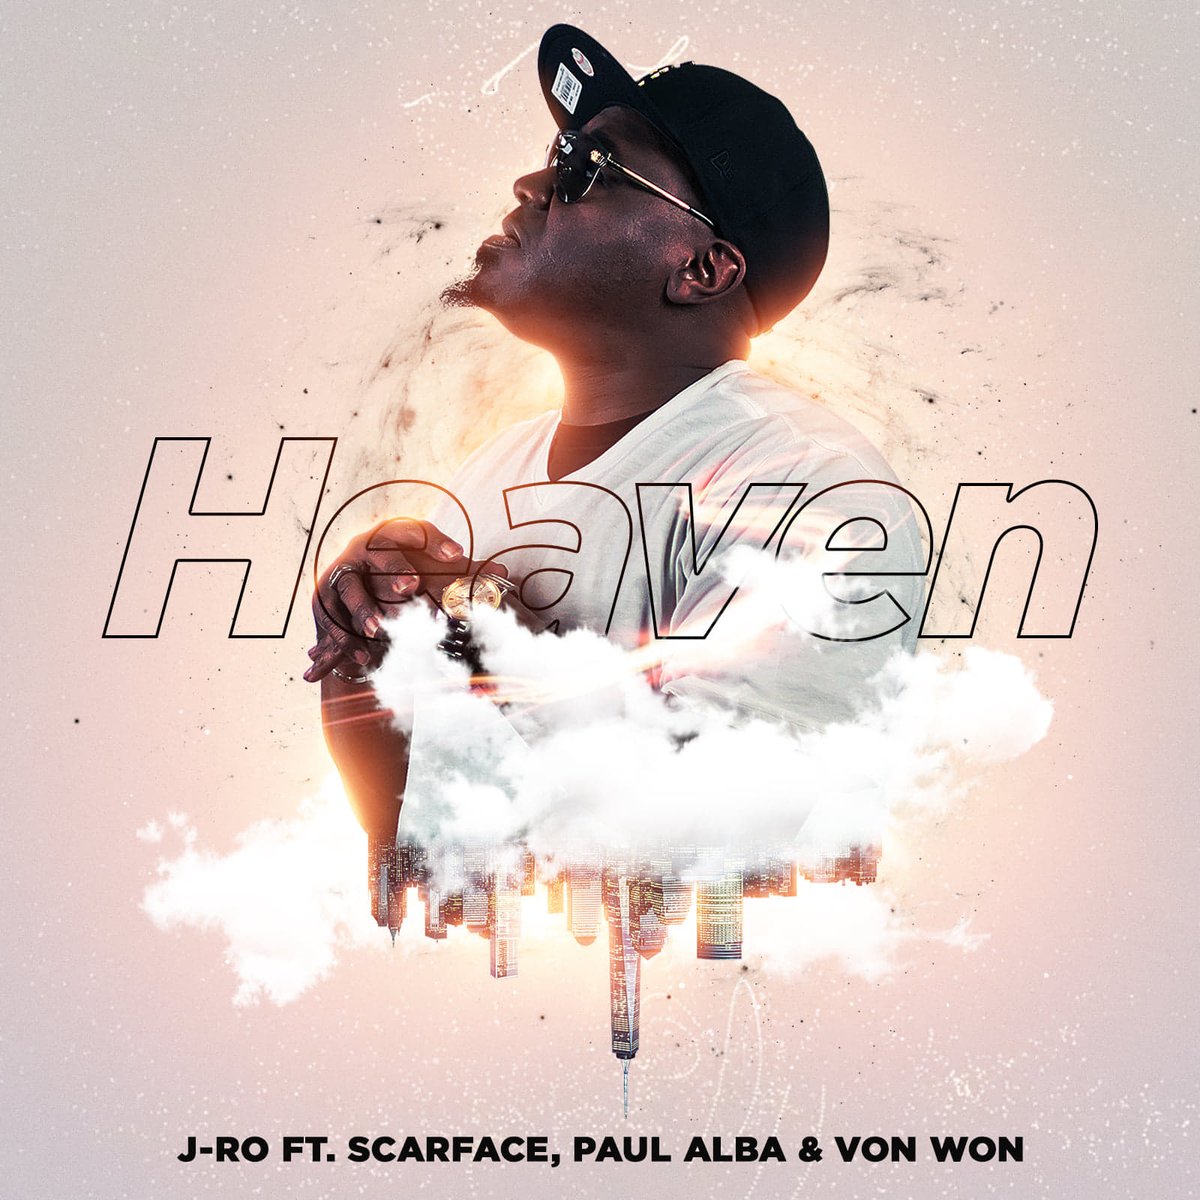 .@JROPulliam new single #Heaven Feat @VonWon @BrotherMob (Scareface) & #PaulAlba

Stream and or download from your favorite music platform today songwhip.com/album/j-ro-2/h…

#TeamPlatinum #hiphop #music #newmusic #GospelHiphop #rap #Spotify #AppleMusic #iTunes #GooglePlay